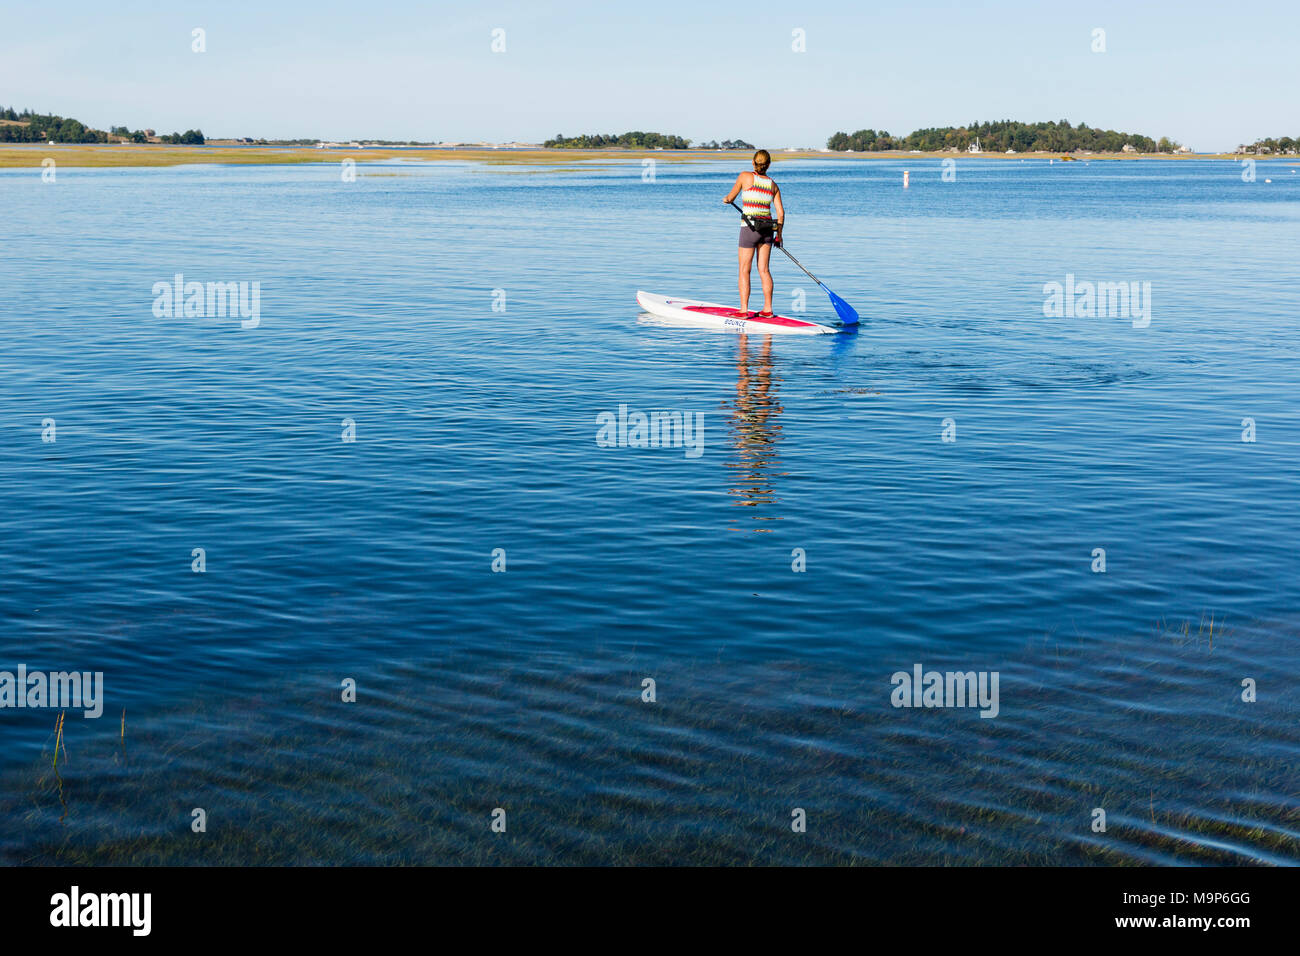 Rear view of woman standing up paddle boarding on Essex River at Cox Reservation in Essex, Massachusetts Stock Photo